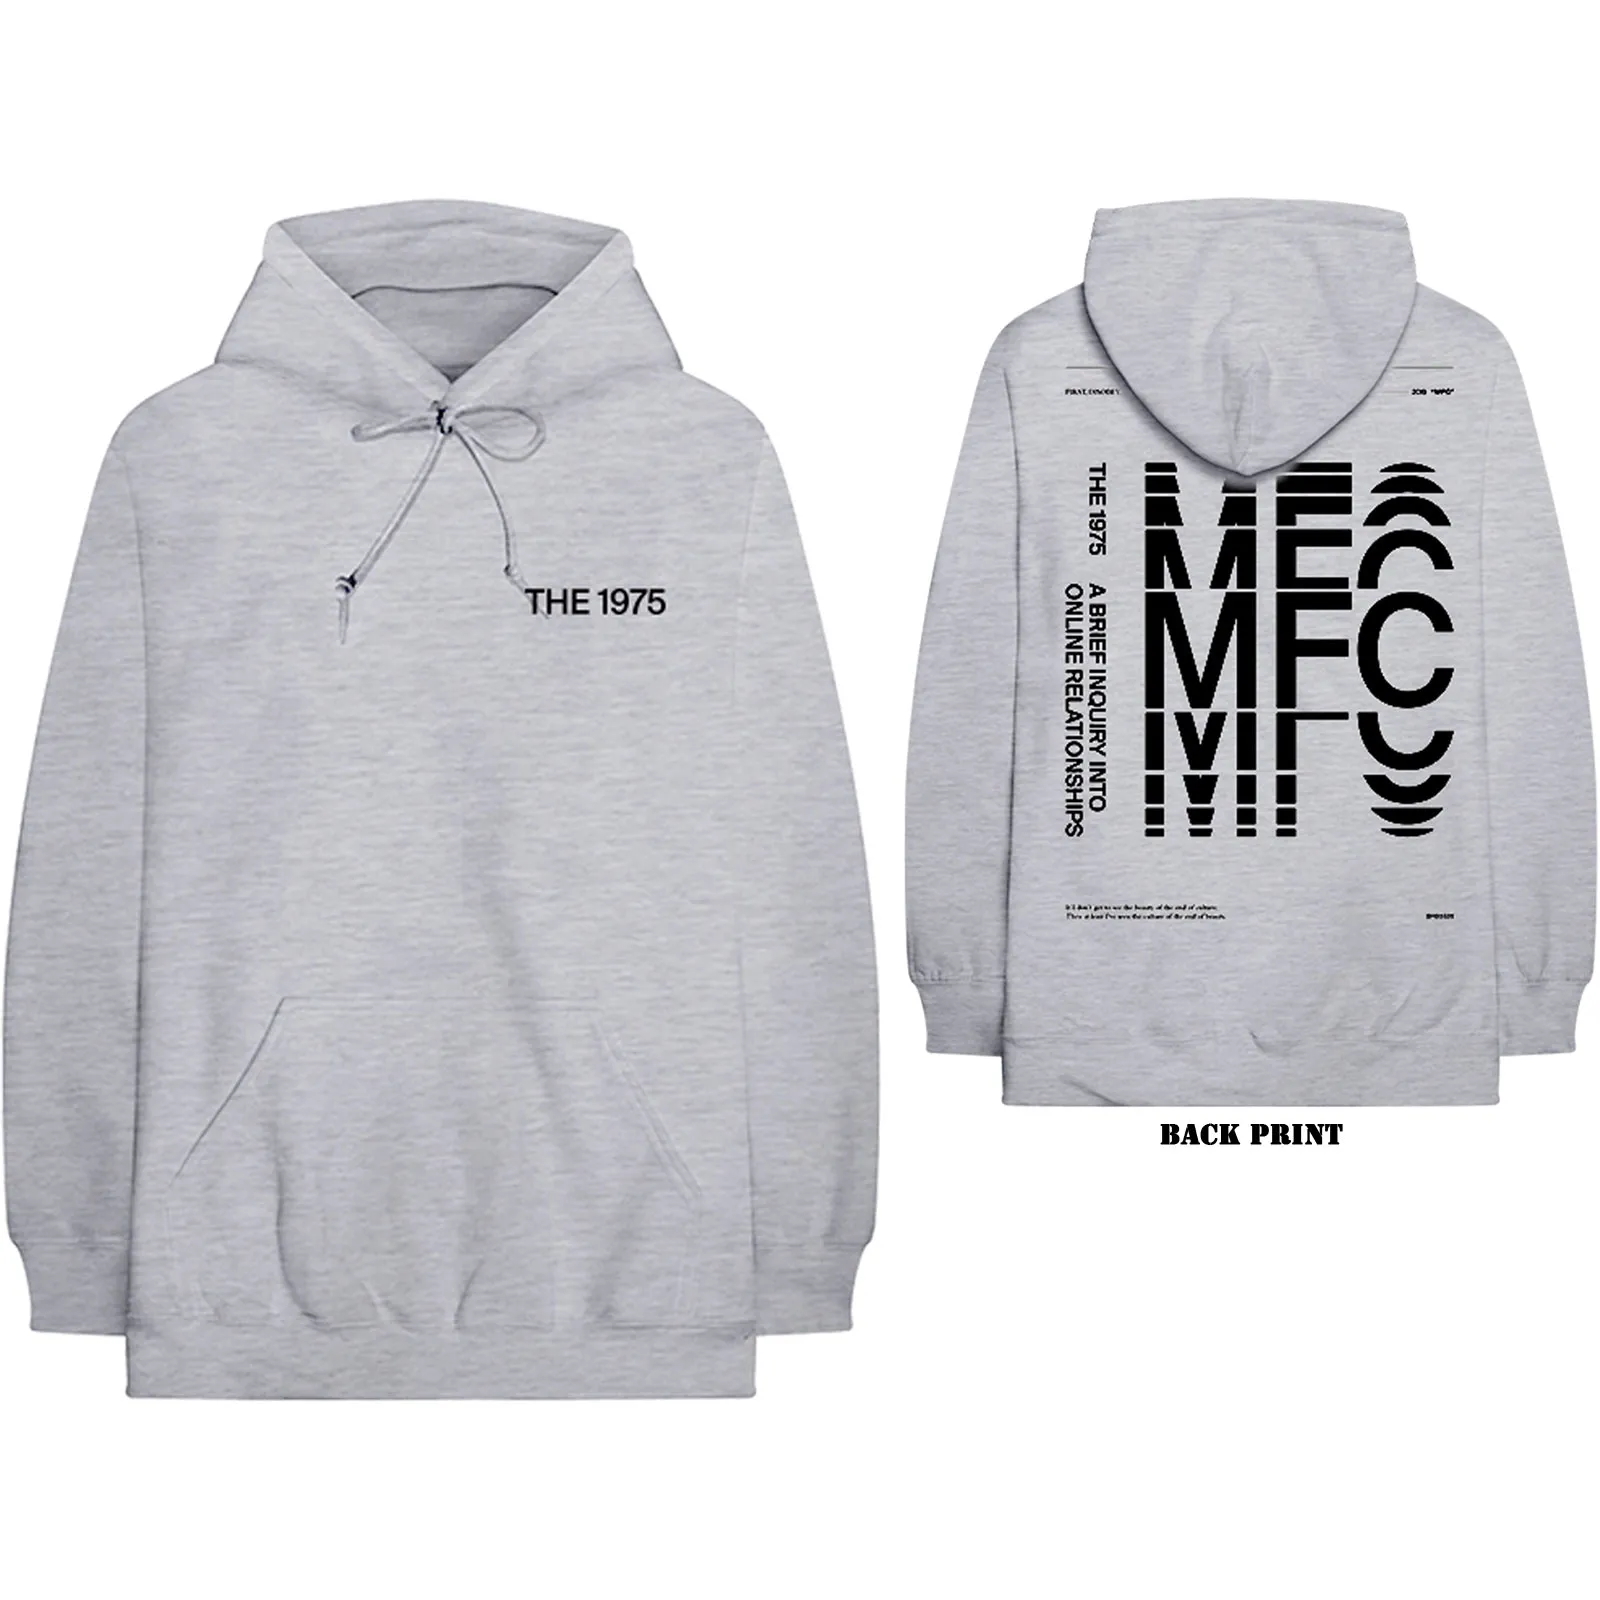 The 1975 - Unisex Pullover Hoodie ABIIOR MFC Back Print artwork